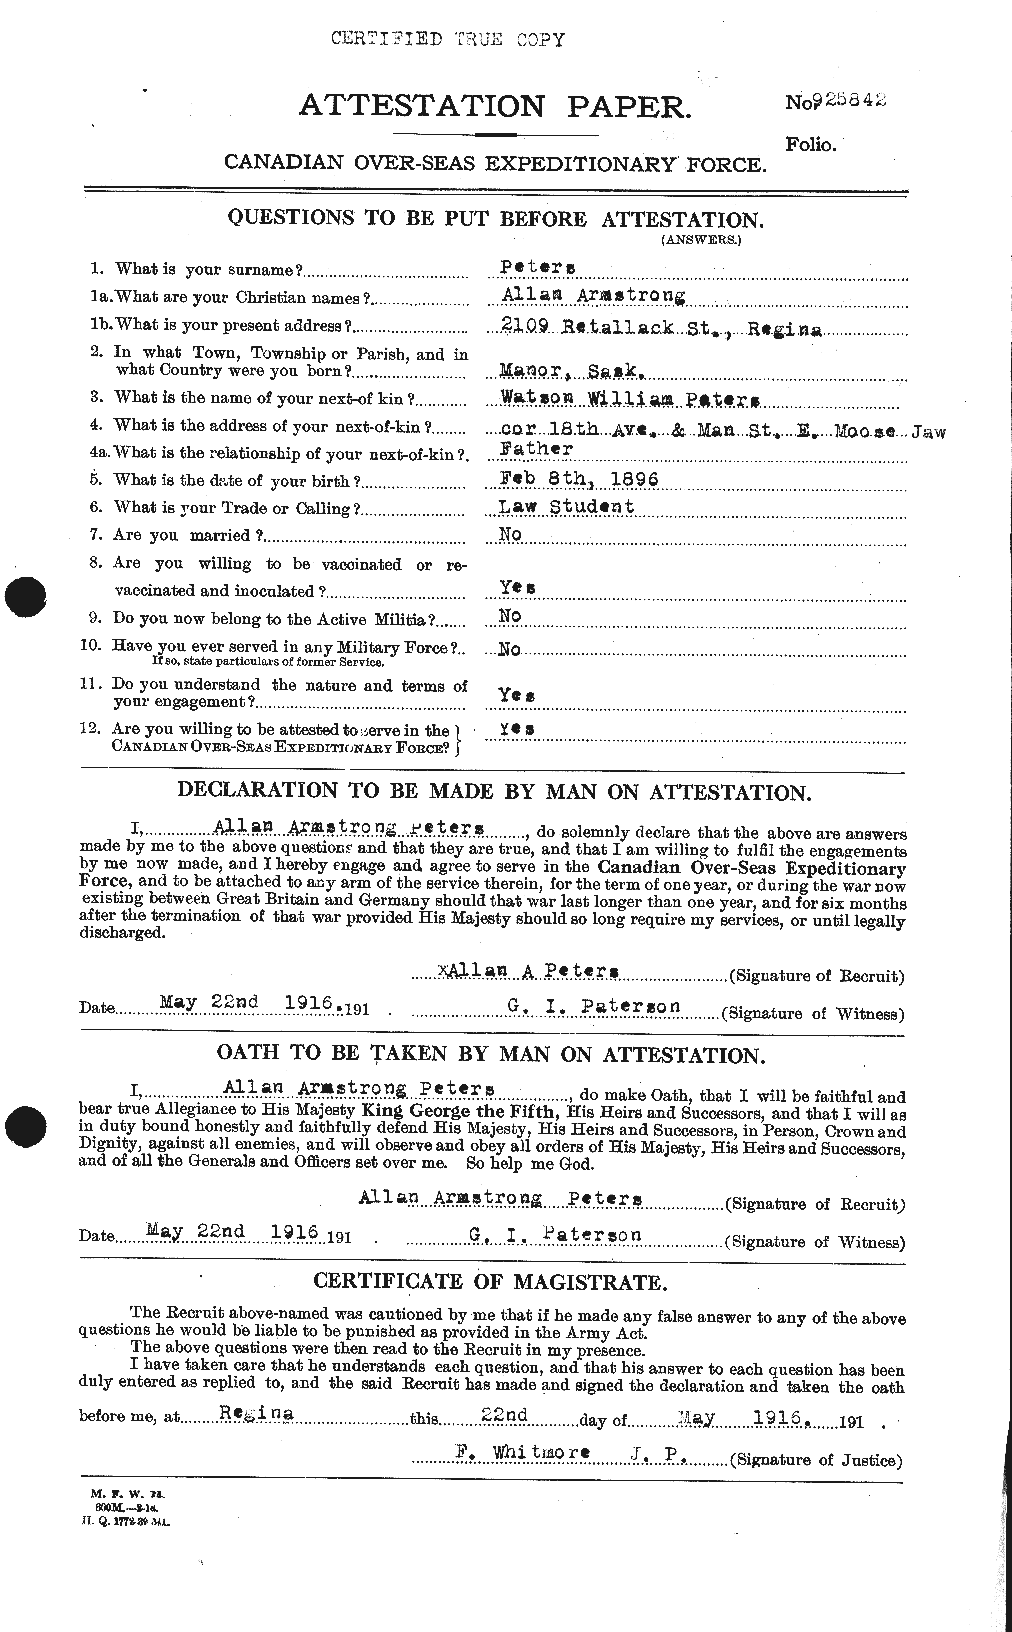 Personnel Records of the First World War - CEF 575342a